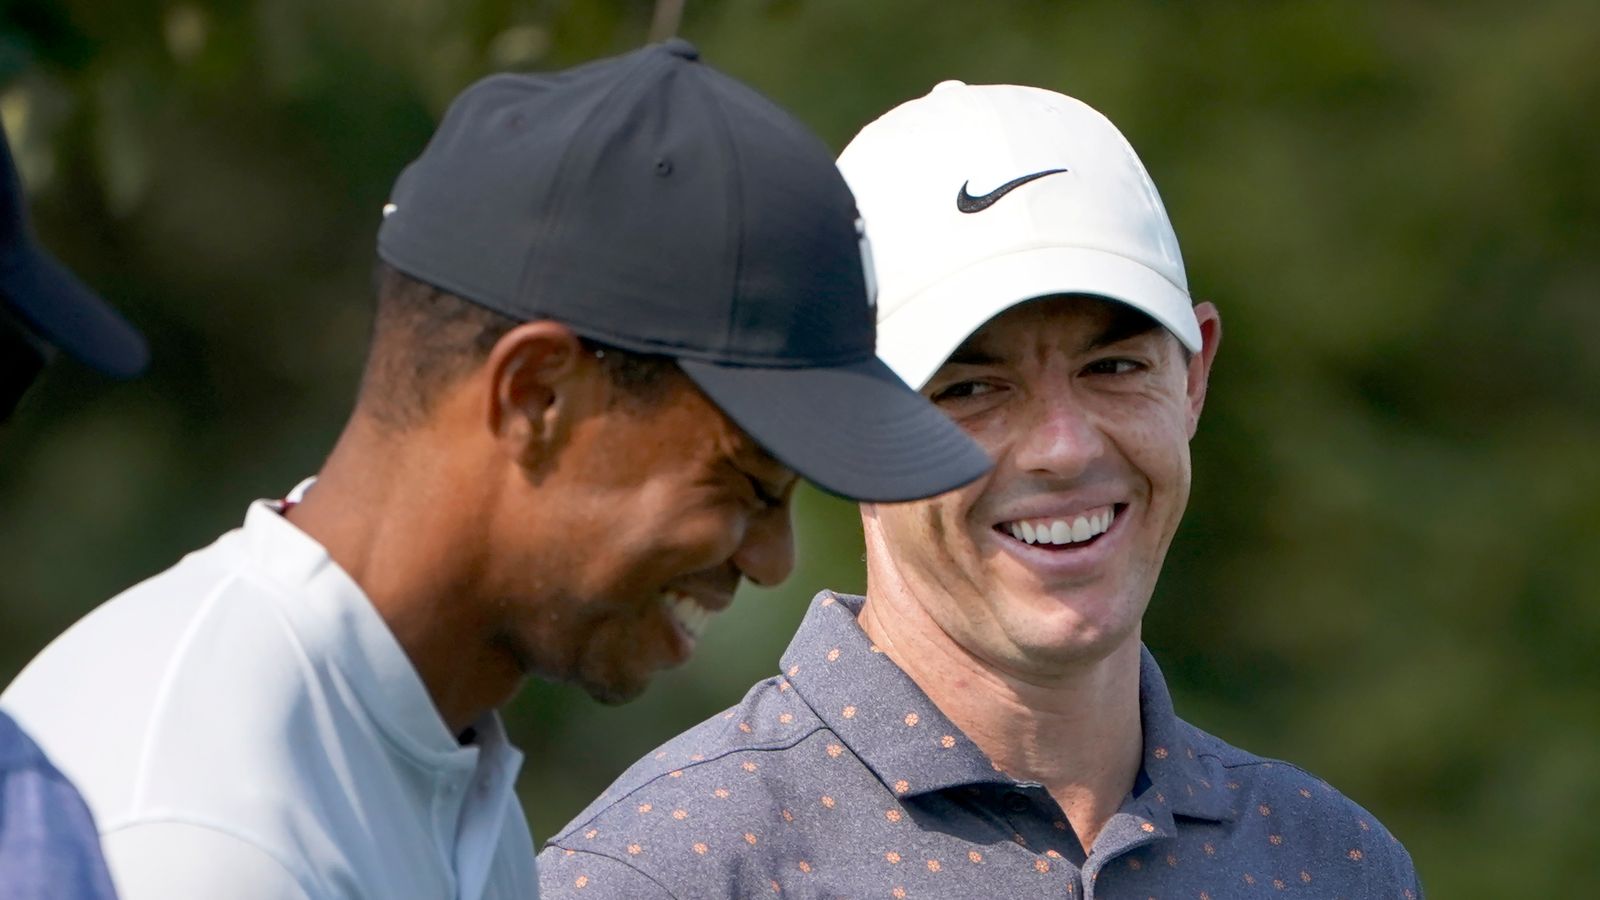 Rory McIlroy hails ‘alpha’ figure Tiger Woods after players meet to discuss LIV Golf Series